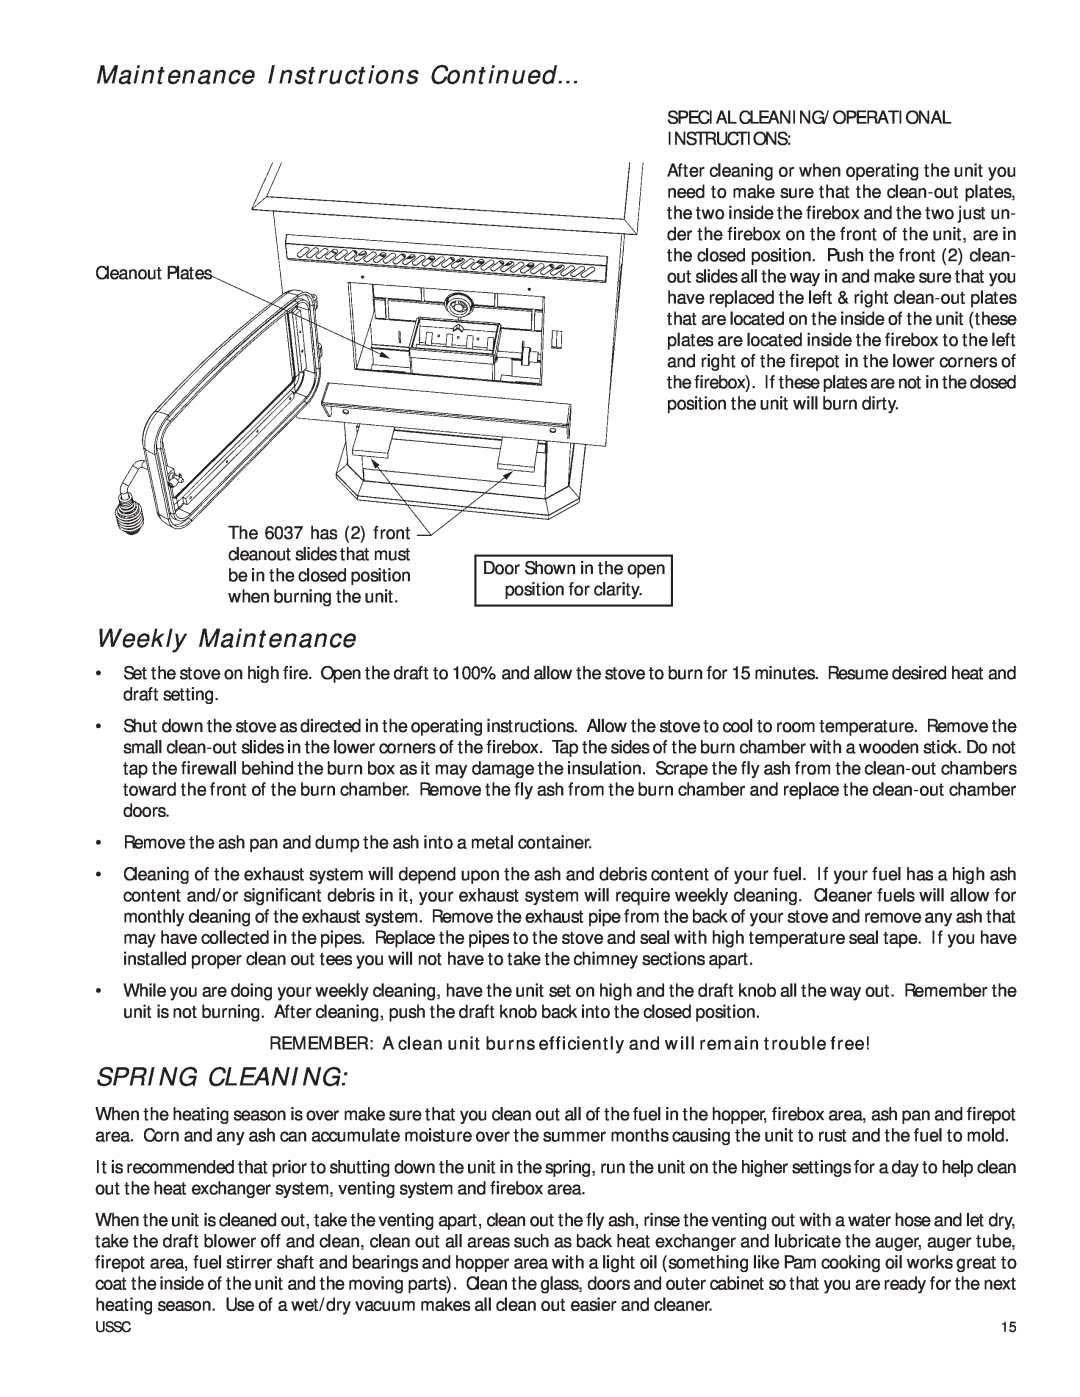 United States Stove 6037 owner manual Maintenance Instructions Continued, Weekly Maintenance, Spring Cleaning 